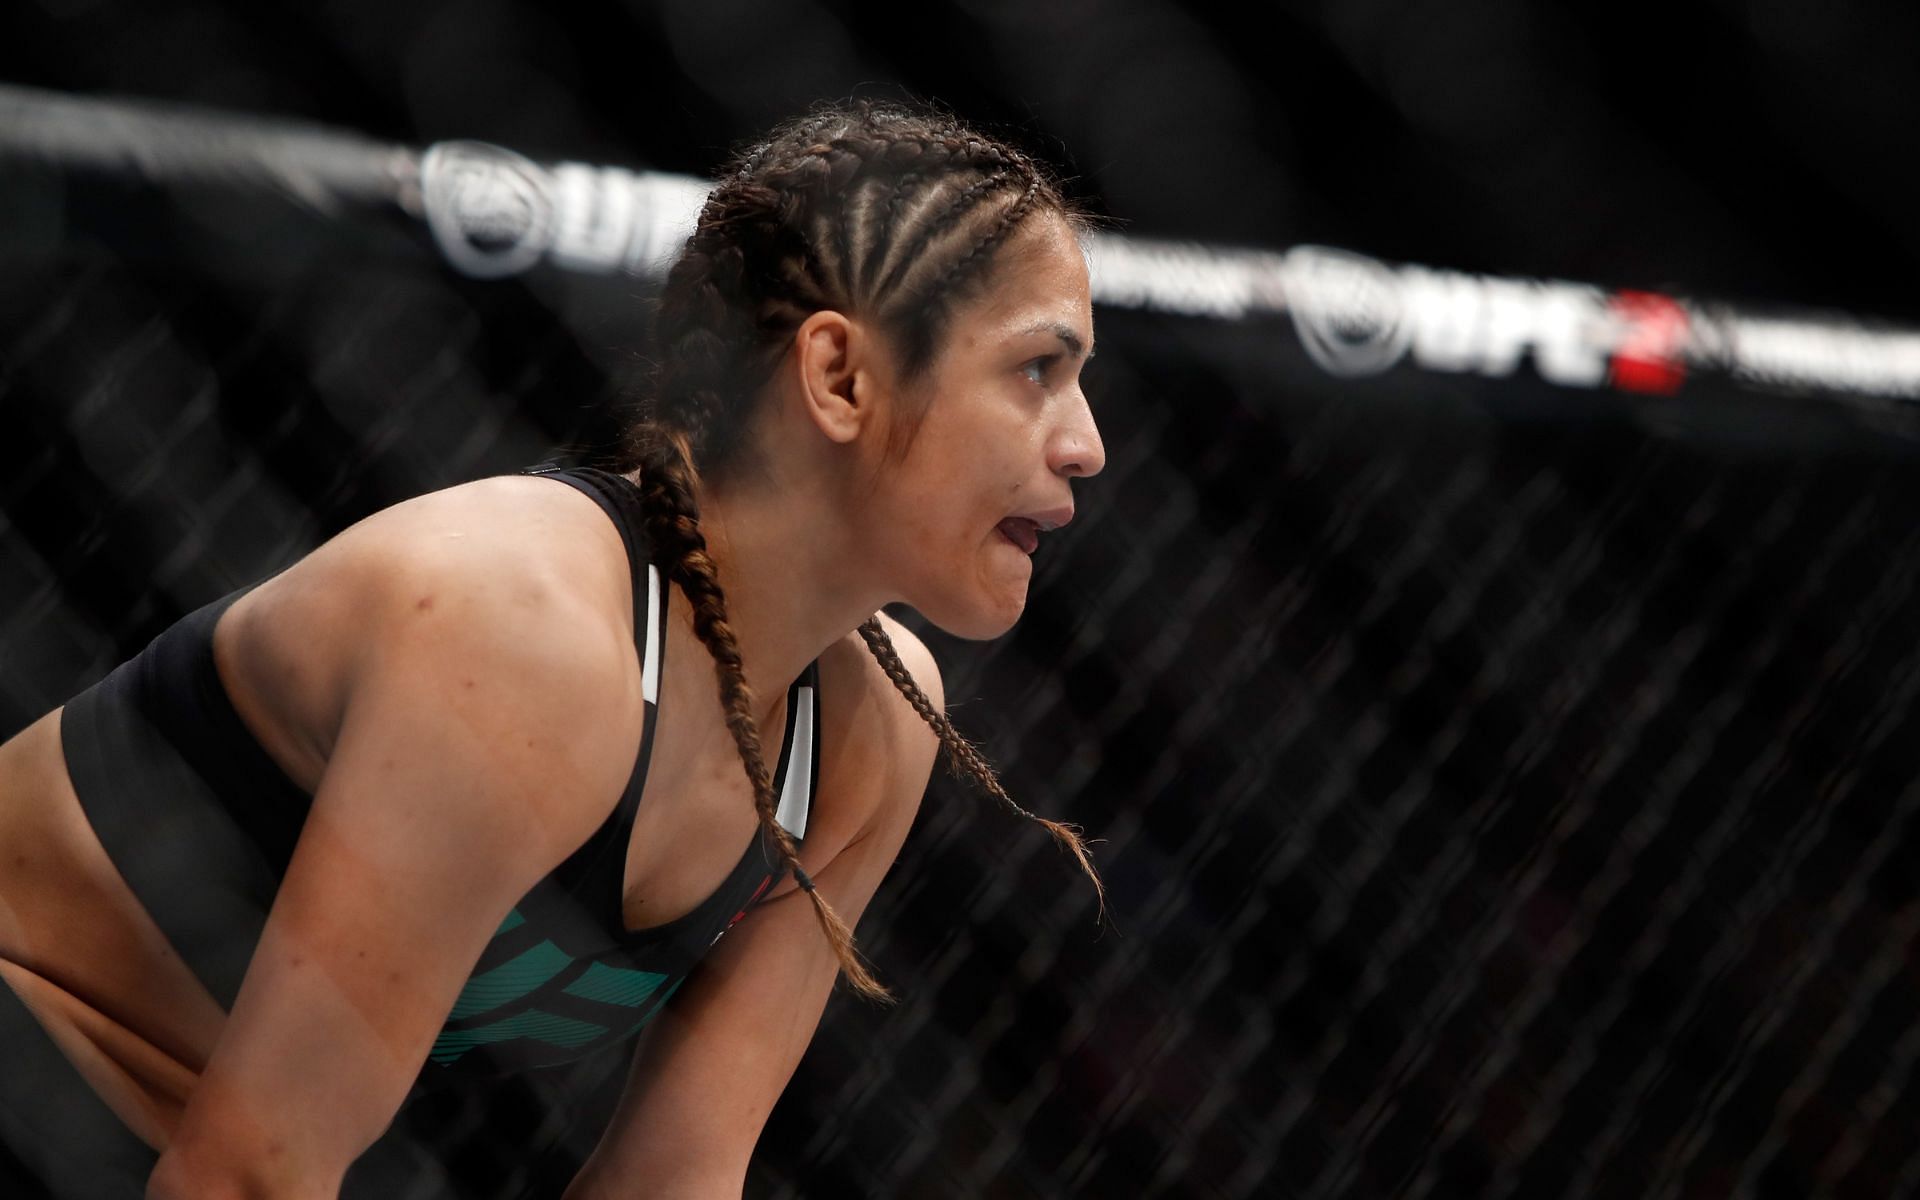 UFC fighter Cynthia Calvillo could not continue in her fight against Andrea Lee